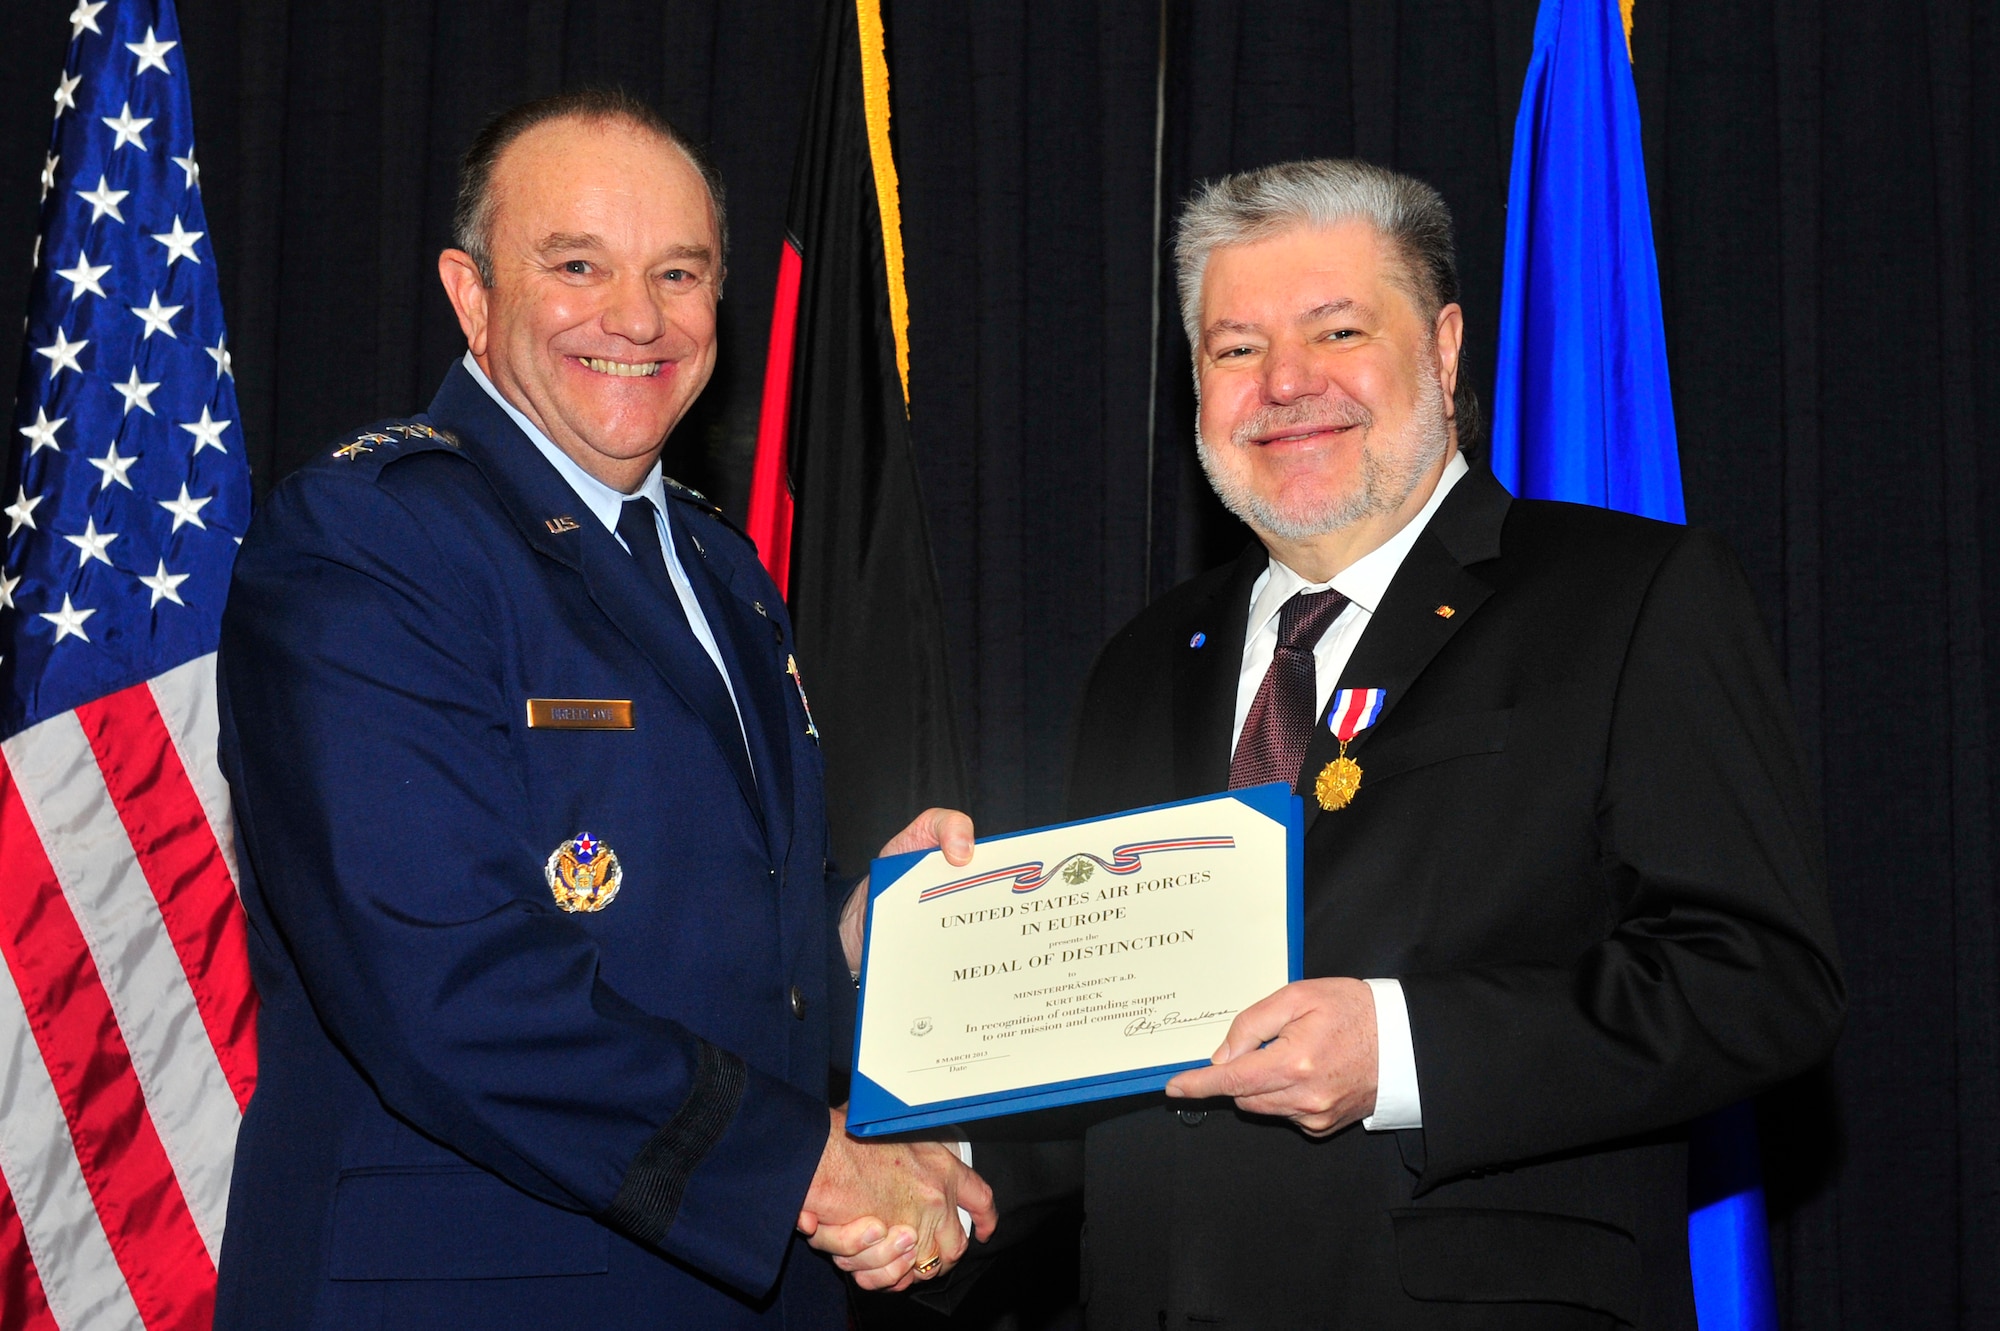 Gen. Philip M. Breedlove, United States Air Forces in Europe and Air Forces Africa commander, presents former Minister President Kurt Beck the U.S. Air Forces in Europe Medal of Distinction on Ramstein Air Base, Germany, March 8, 2013.  The USAFE Medal of Distinction is awarded to non-U.S. citizens in recognition of extraordinary service, achievements, or support to the accomplishment of the mission of USAFE. (U.S. Air Force photo/Senior Airman Aaron-Forrest Wainwright)